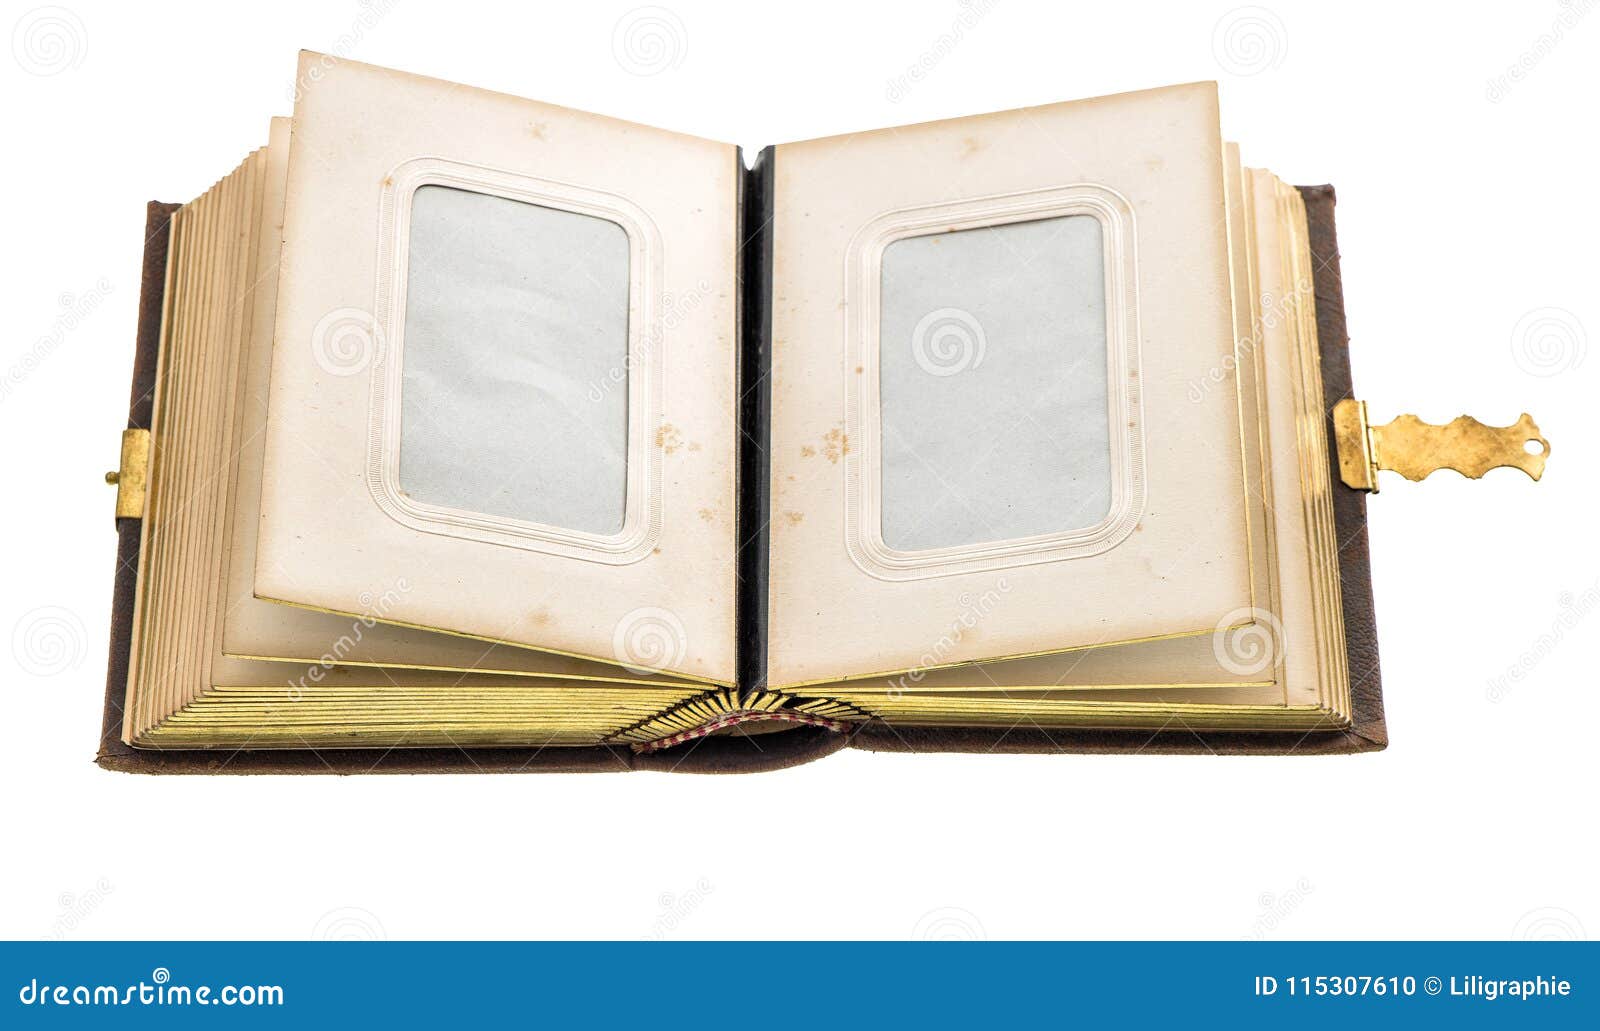 Vintage Photo Album Photo Paper Pages White Background Stock Photo - Image  of background, blank: 115307610